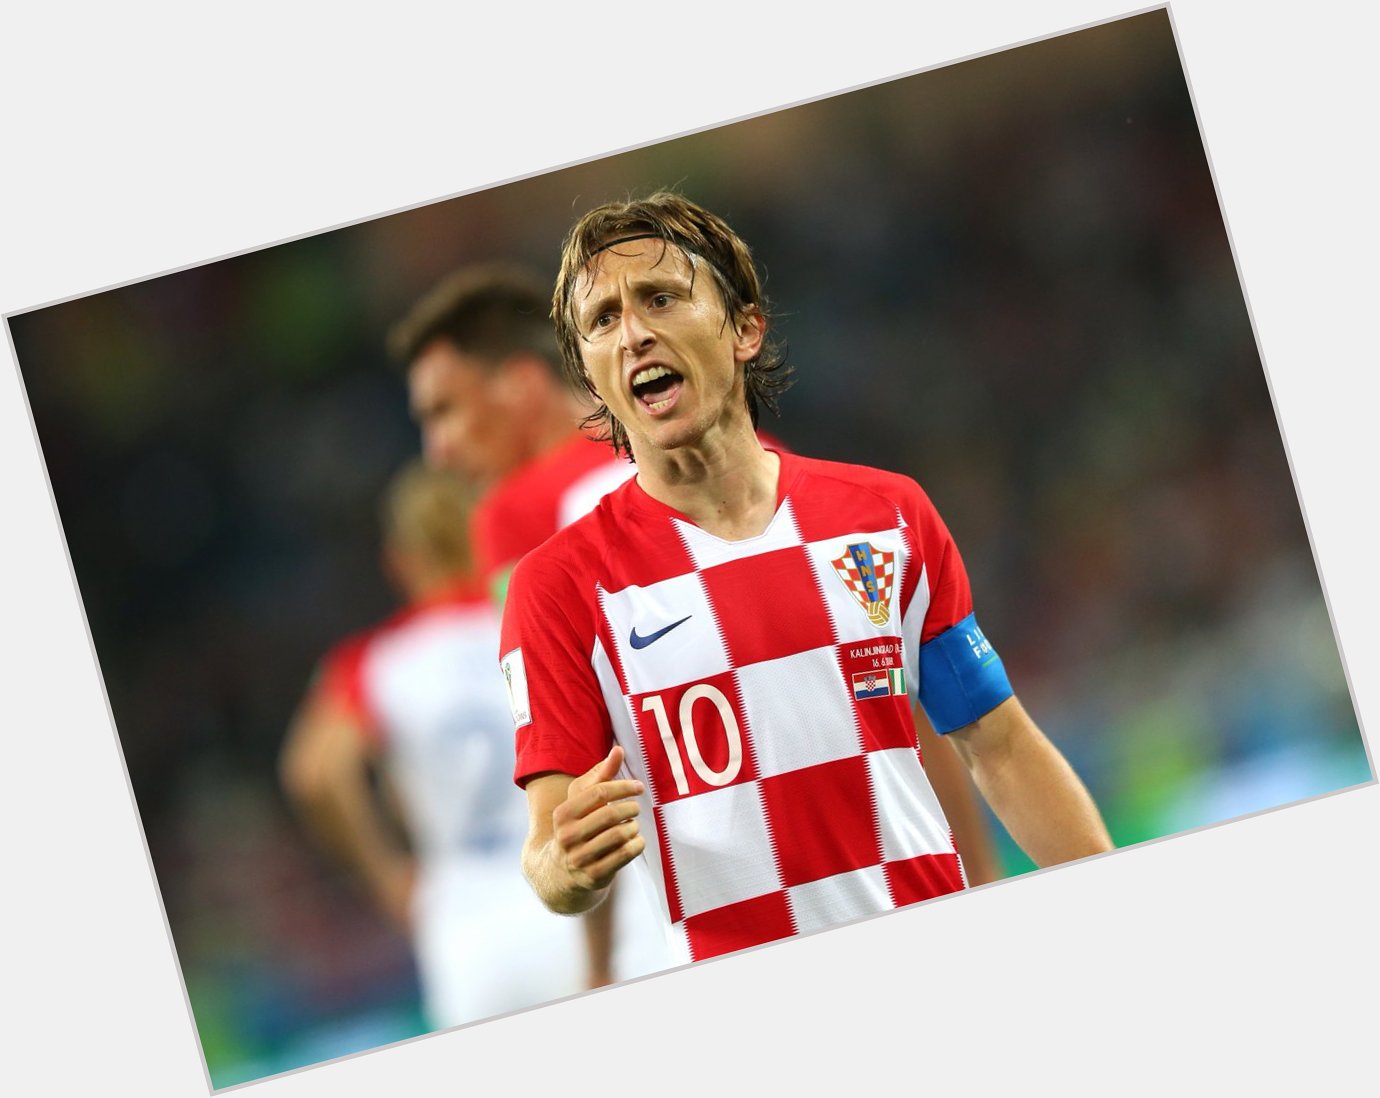 Happy Birthday to Luka Modric. One of my favorite players and fantastic player for Croatia and for Real Madrid. 